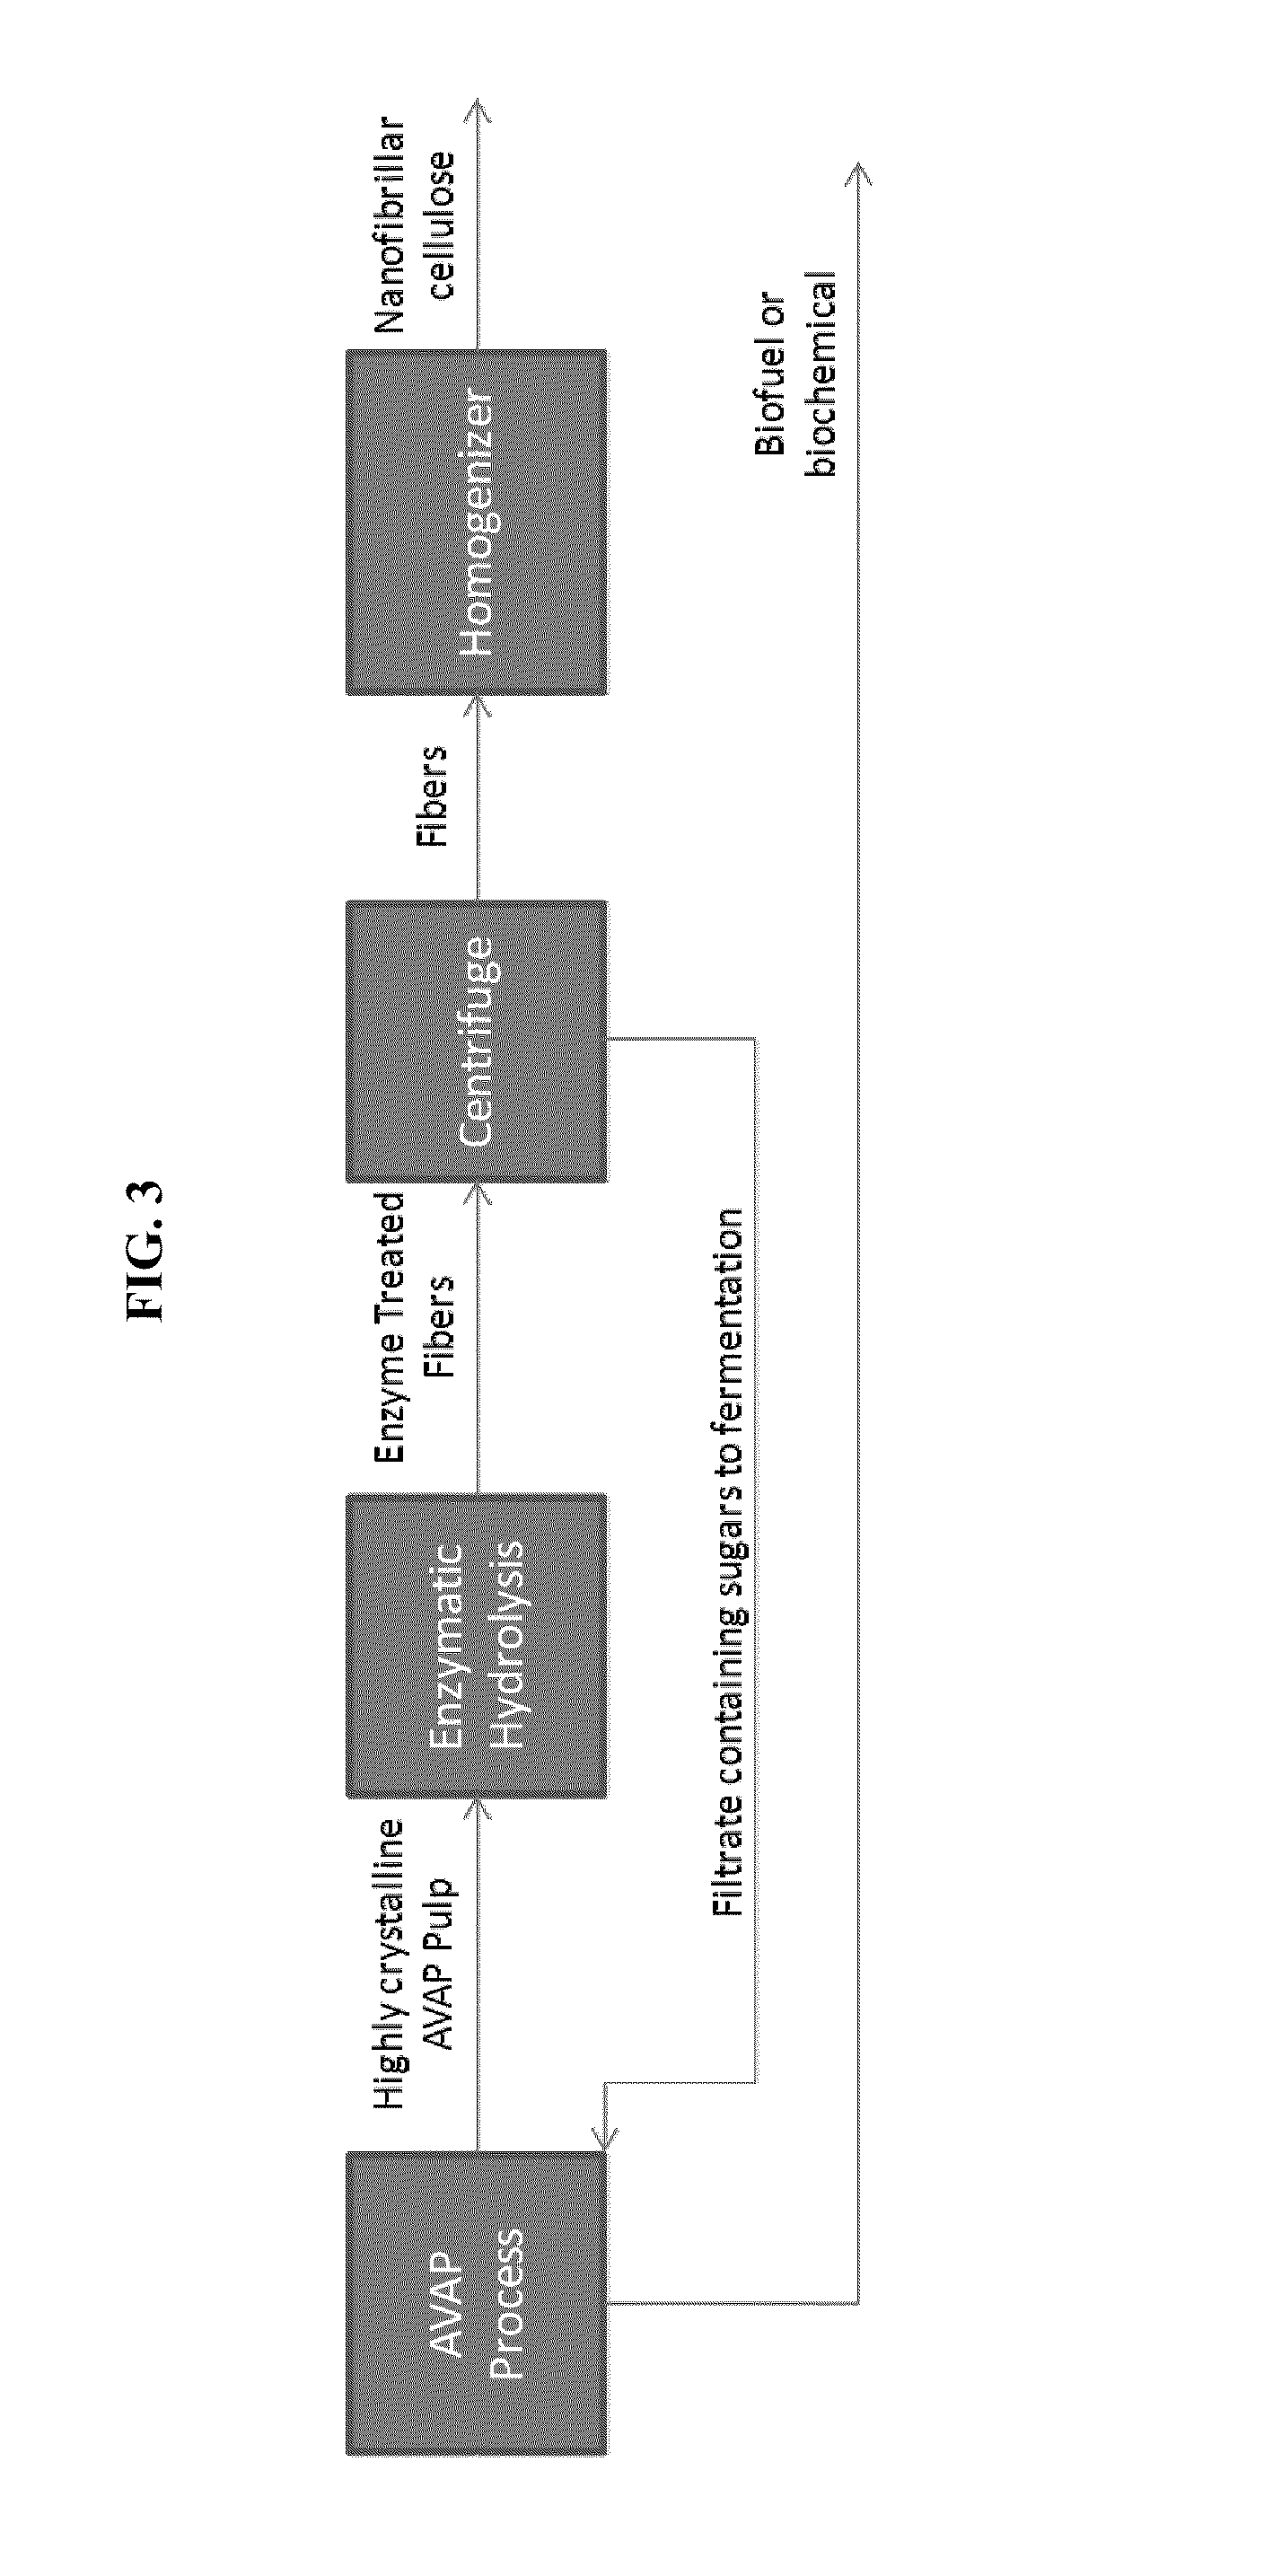 Processes and apparatus for producing nanocellulose, and compositions and products produced therefrom